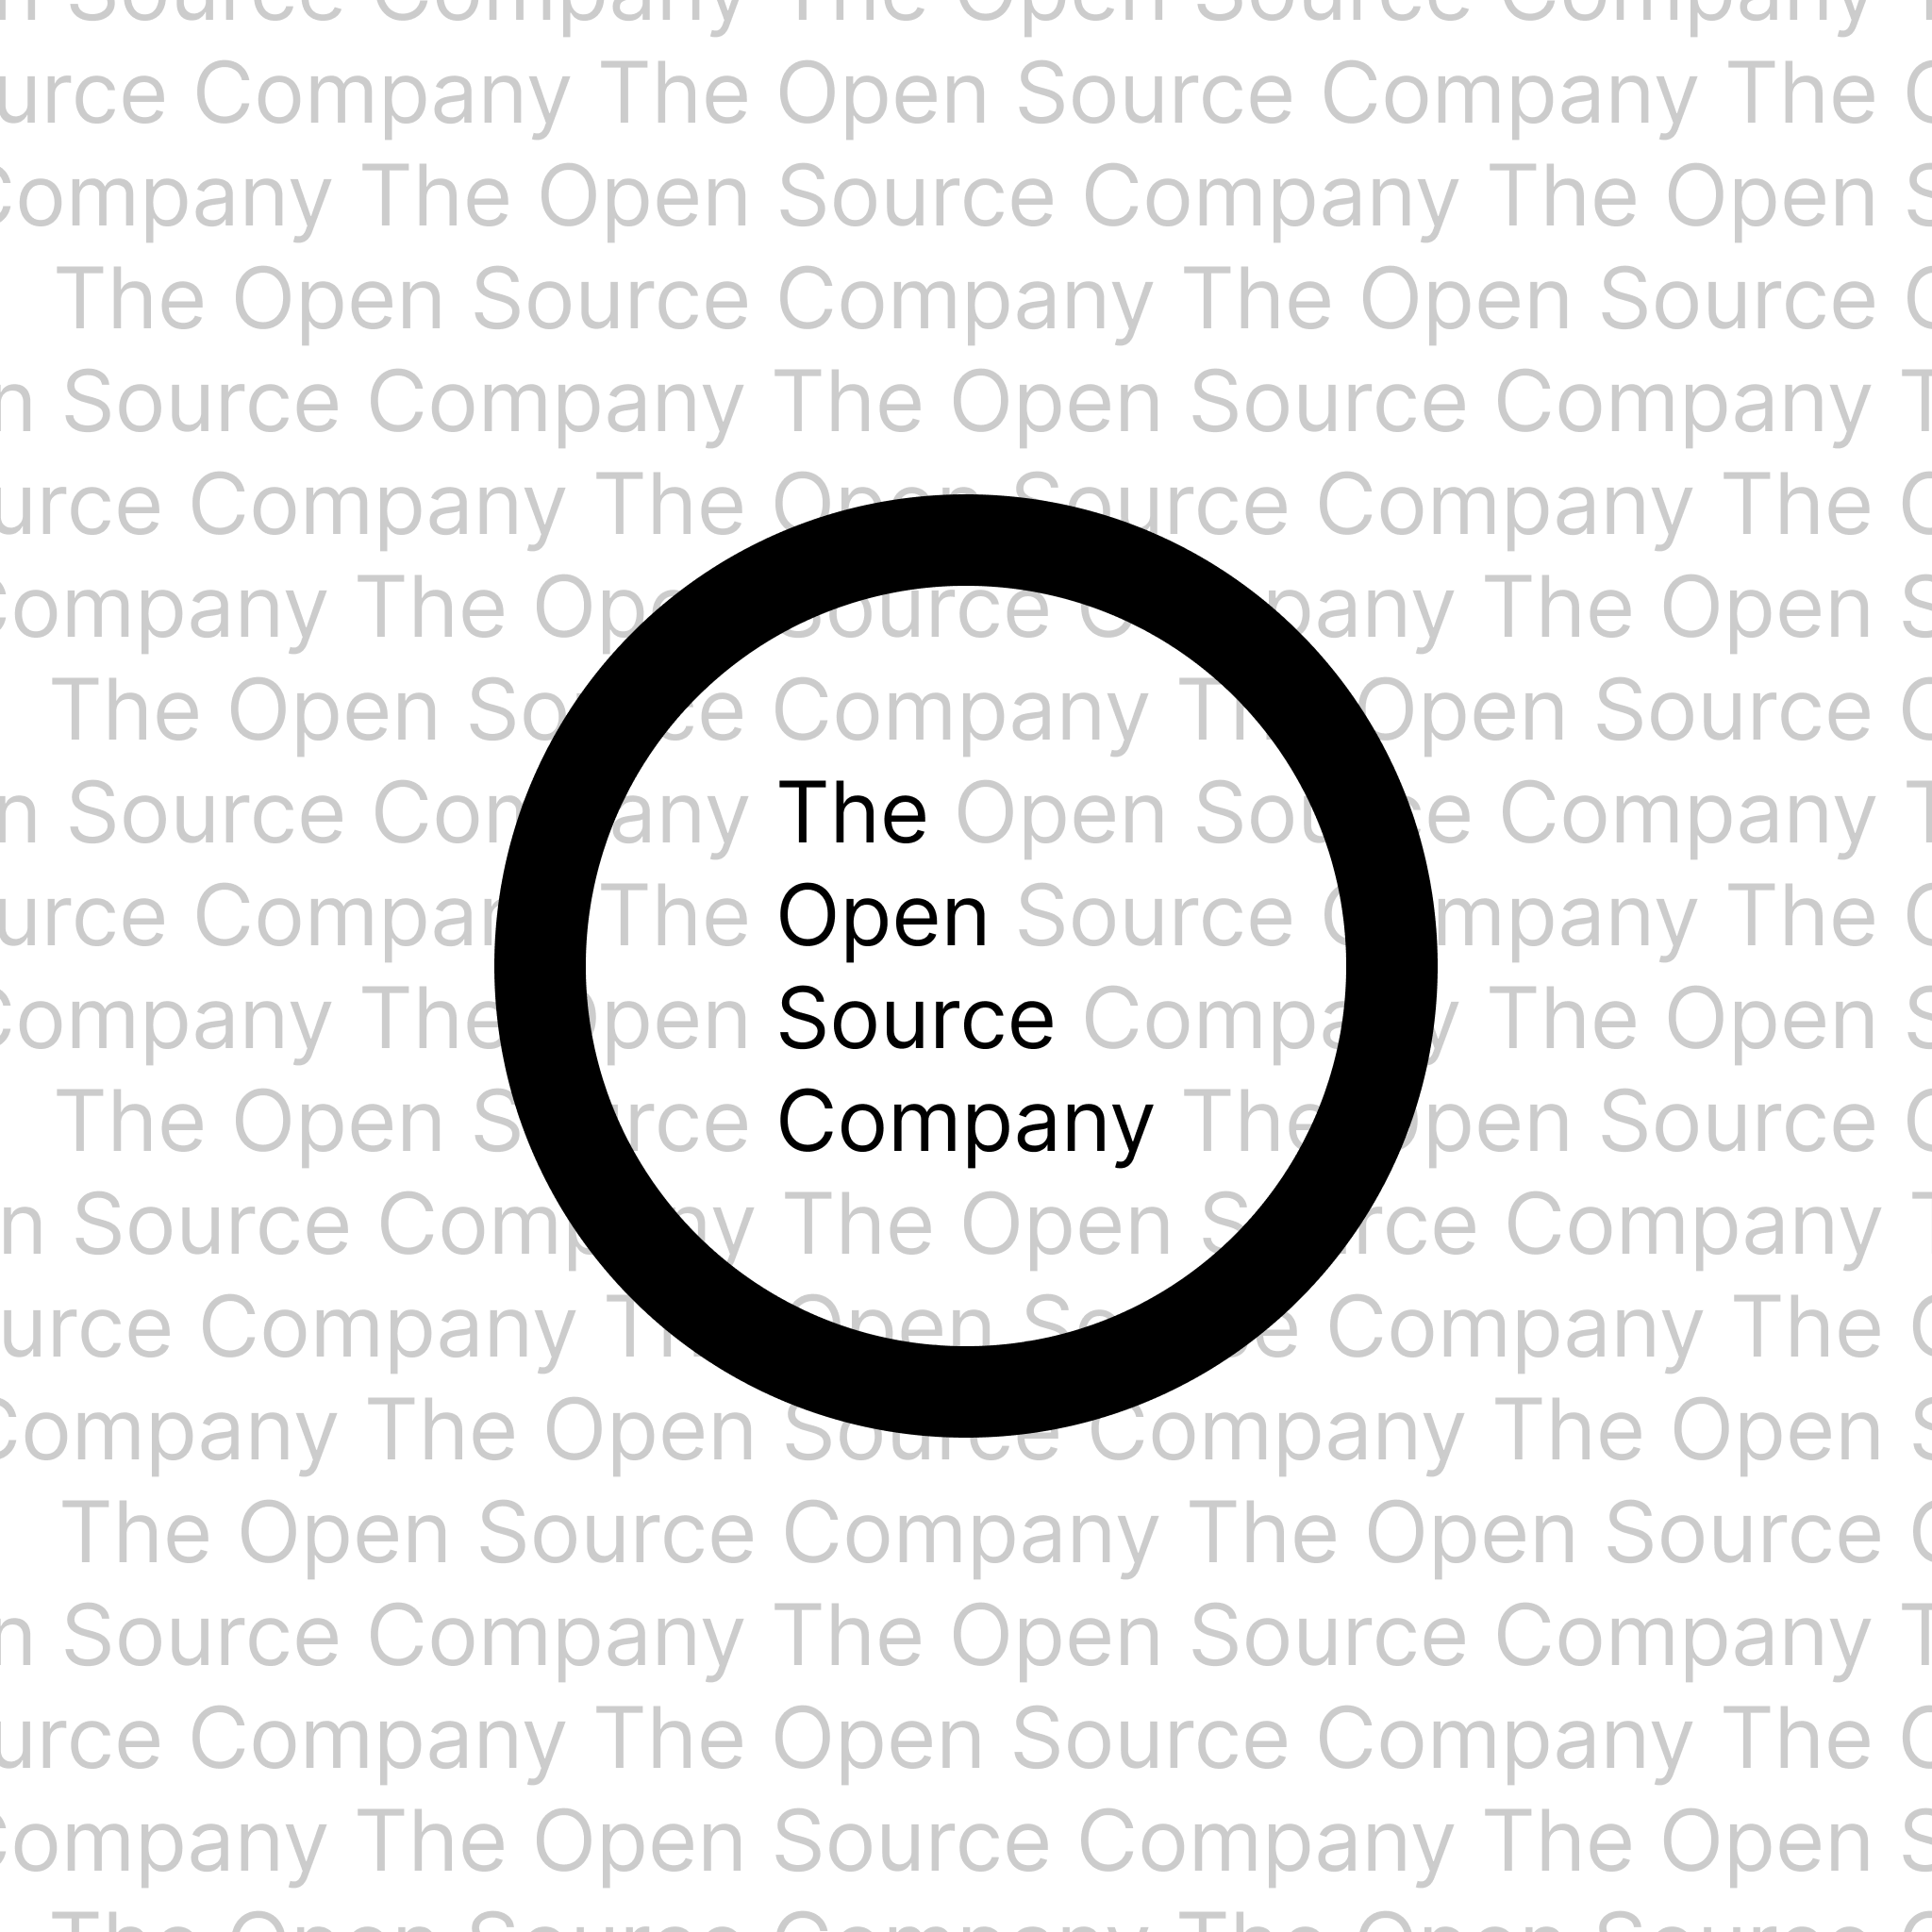 The Open Source Company's Logo